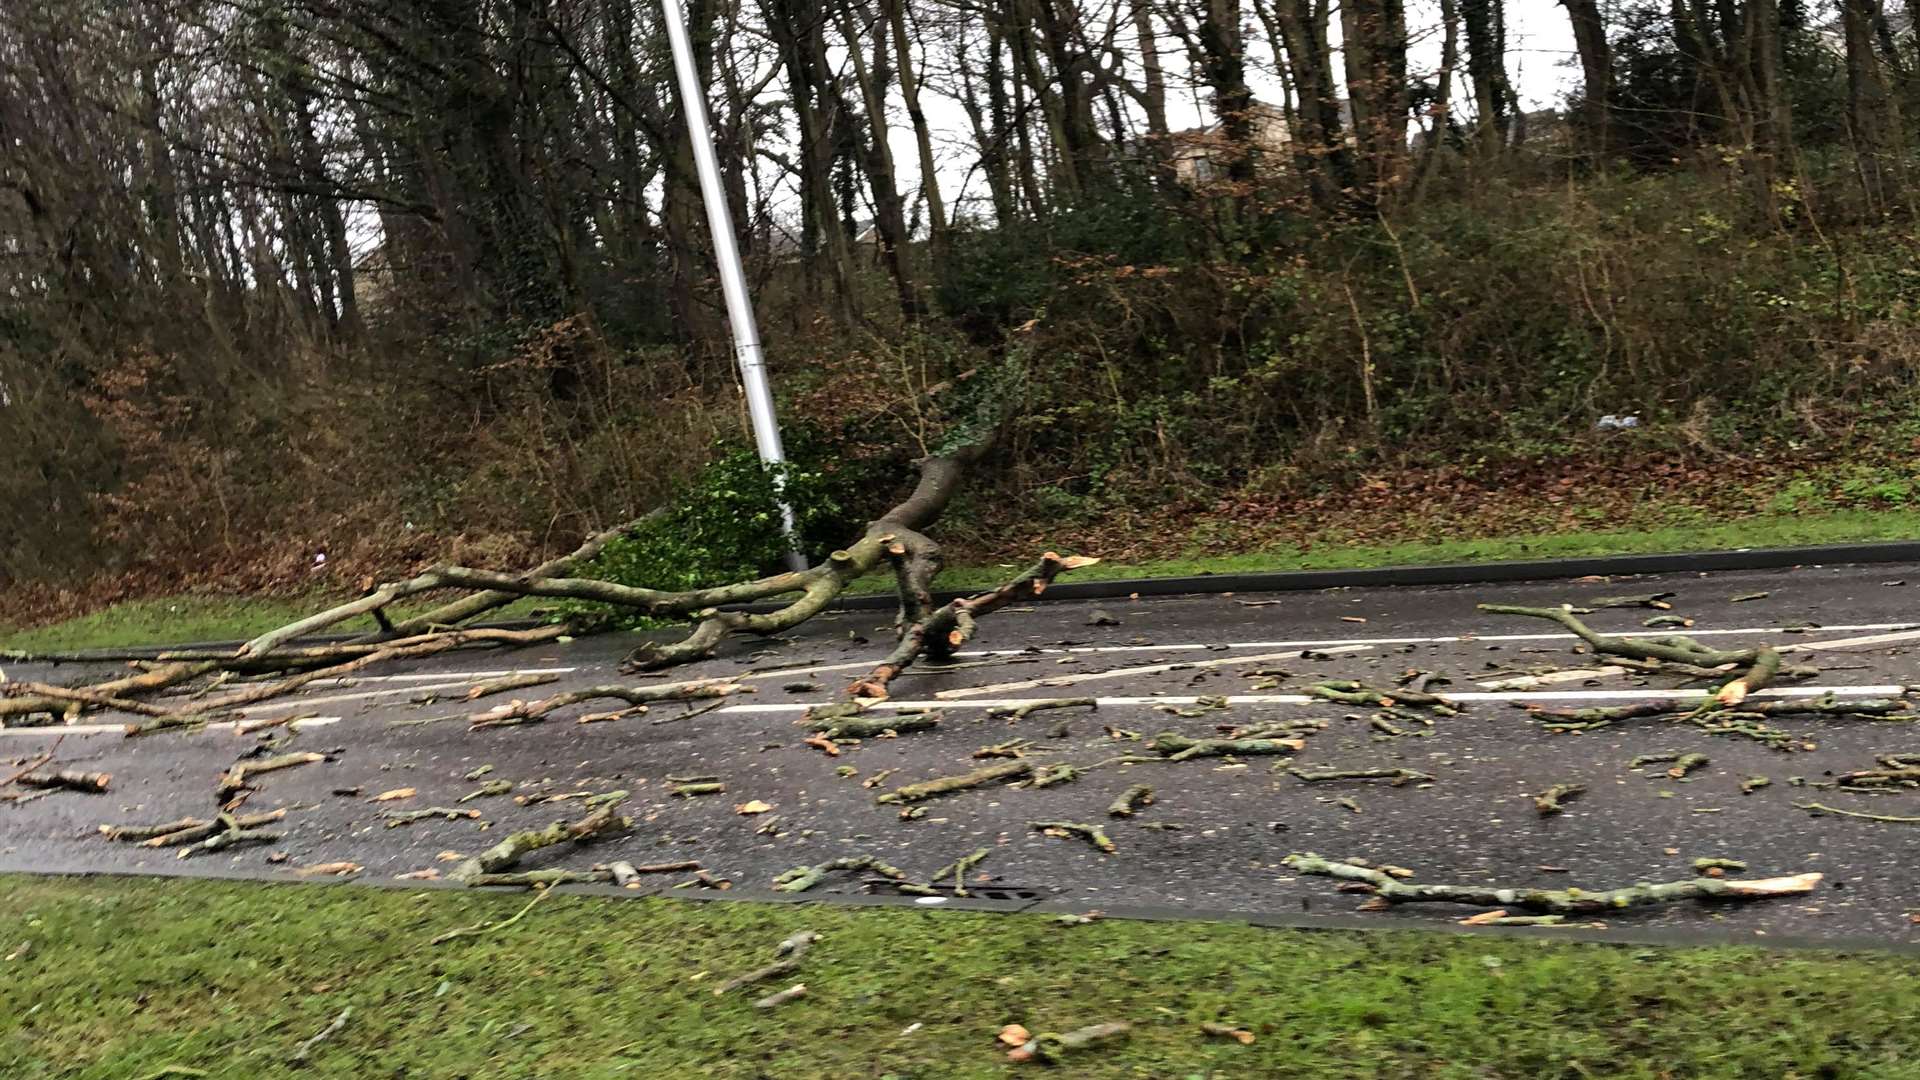 Another tree has also fallen in the area. Photo: Robert Andrew Williams